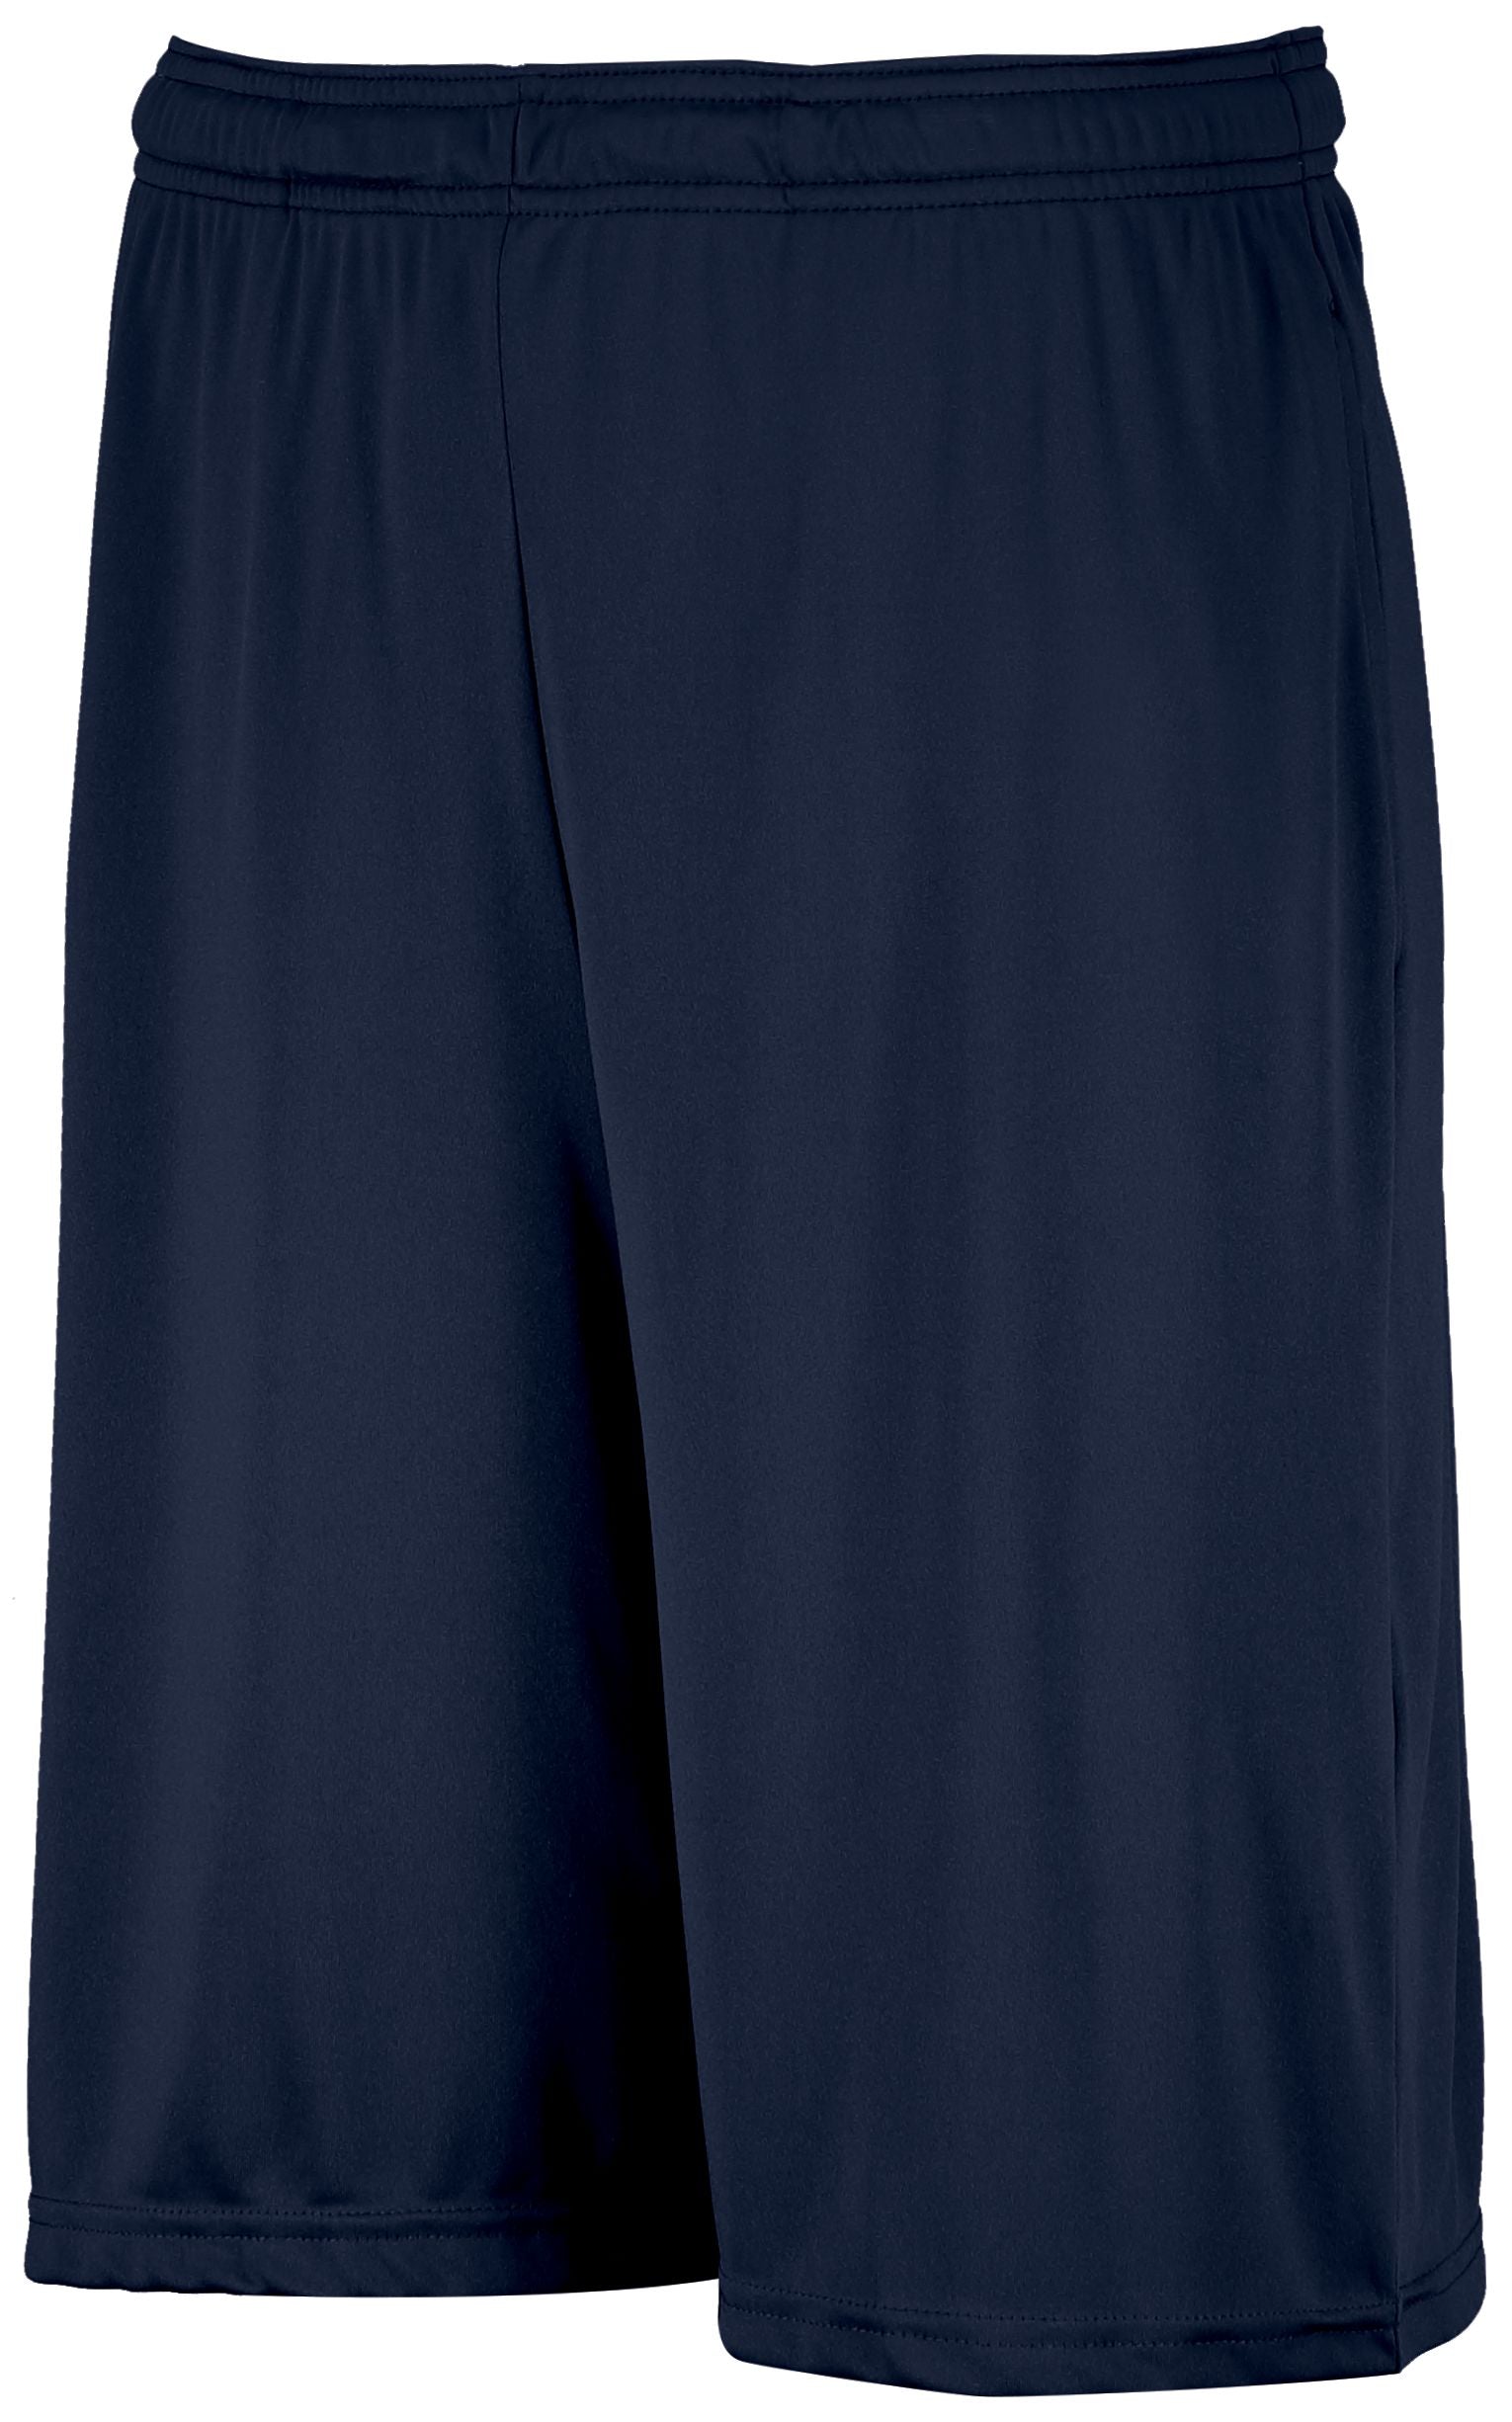 Russell Athletic Dri-Power Essential Performance Shorts With Pockets in Navy  -Part of the Adult, Adult-Shorts, Russell-Athletic-Products product lines at KanaleyCreations.com